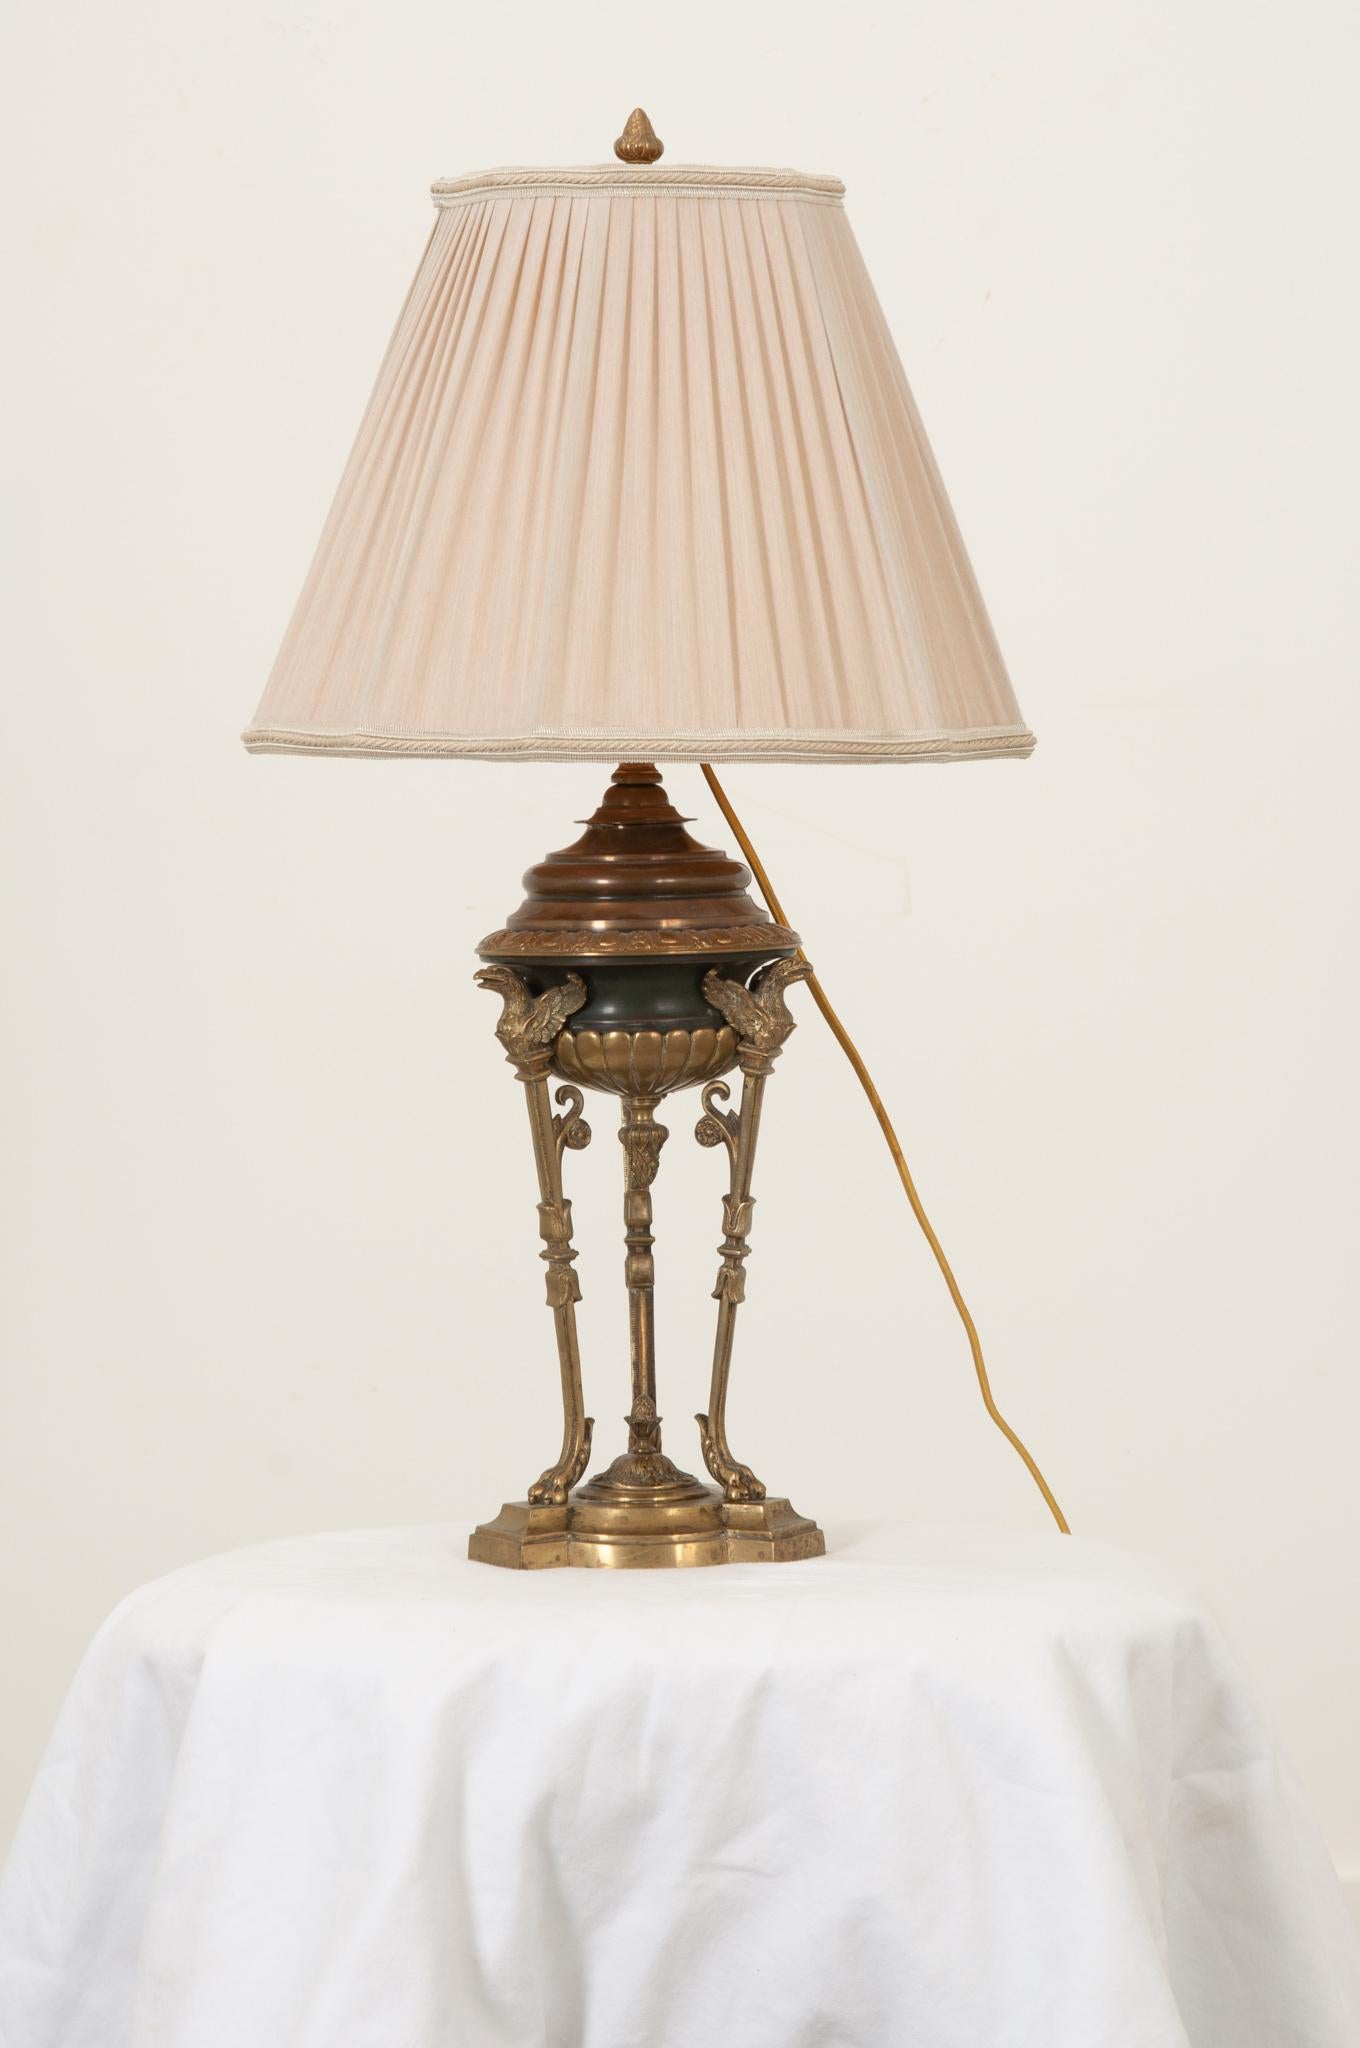 An early 20th French Empire style table lamp has a concave tri-form bronze plinth base set atop a slightly larger piece of marble in the same shape. The upper bowl portion is supported by three brass legs with paw feet topped by three brass gryffon